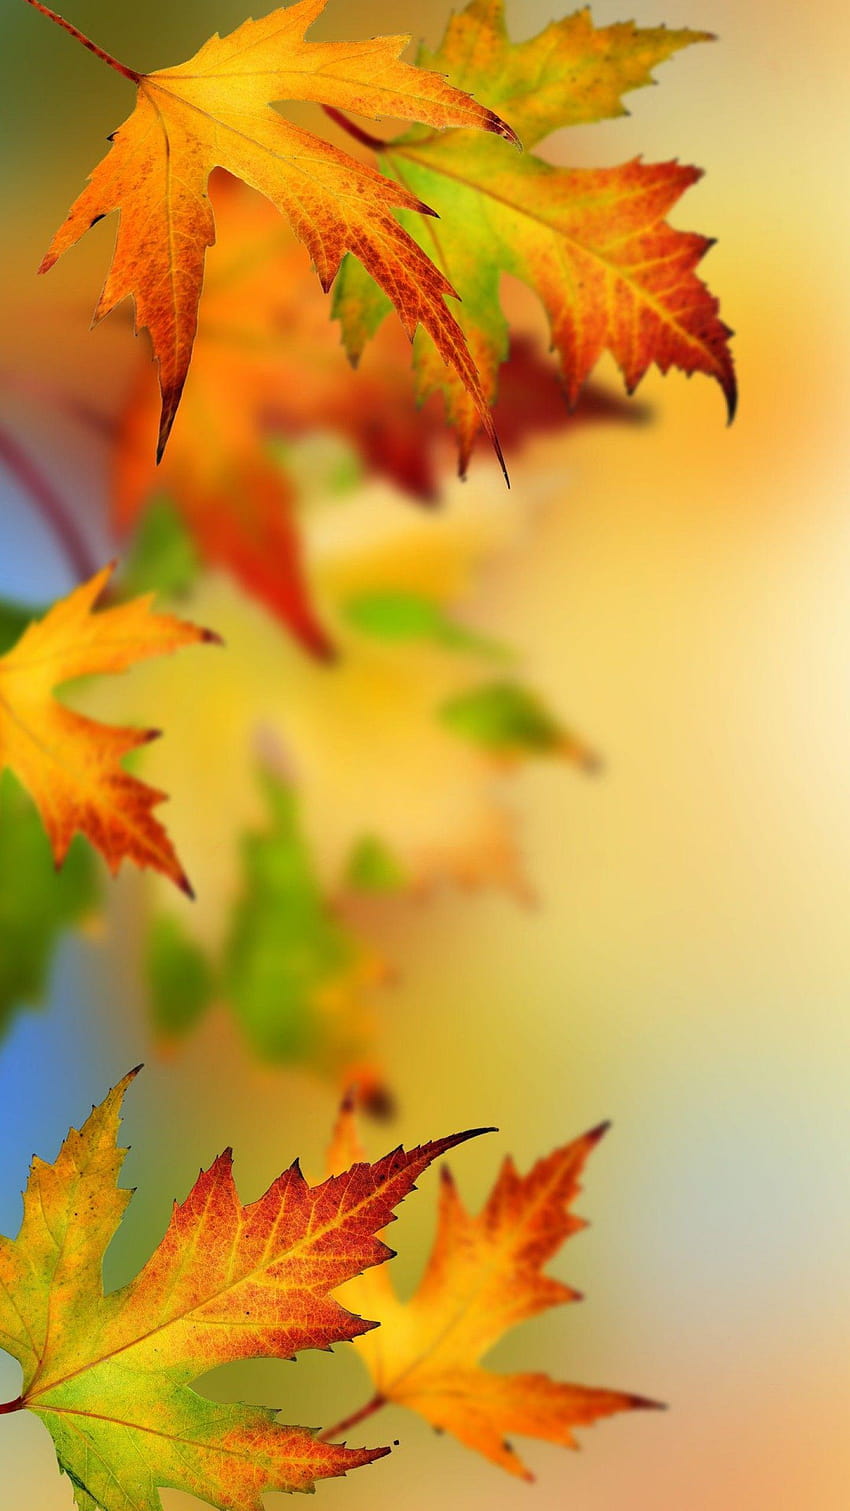 Samsung Galaxy S7 and S7 Edge Alternative with Autumn, leave HD phone wallpaper